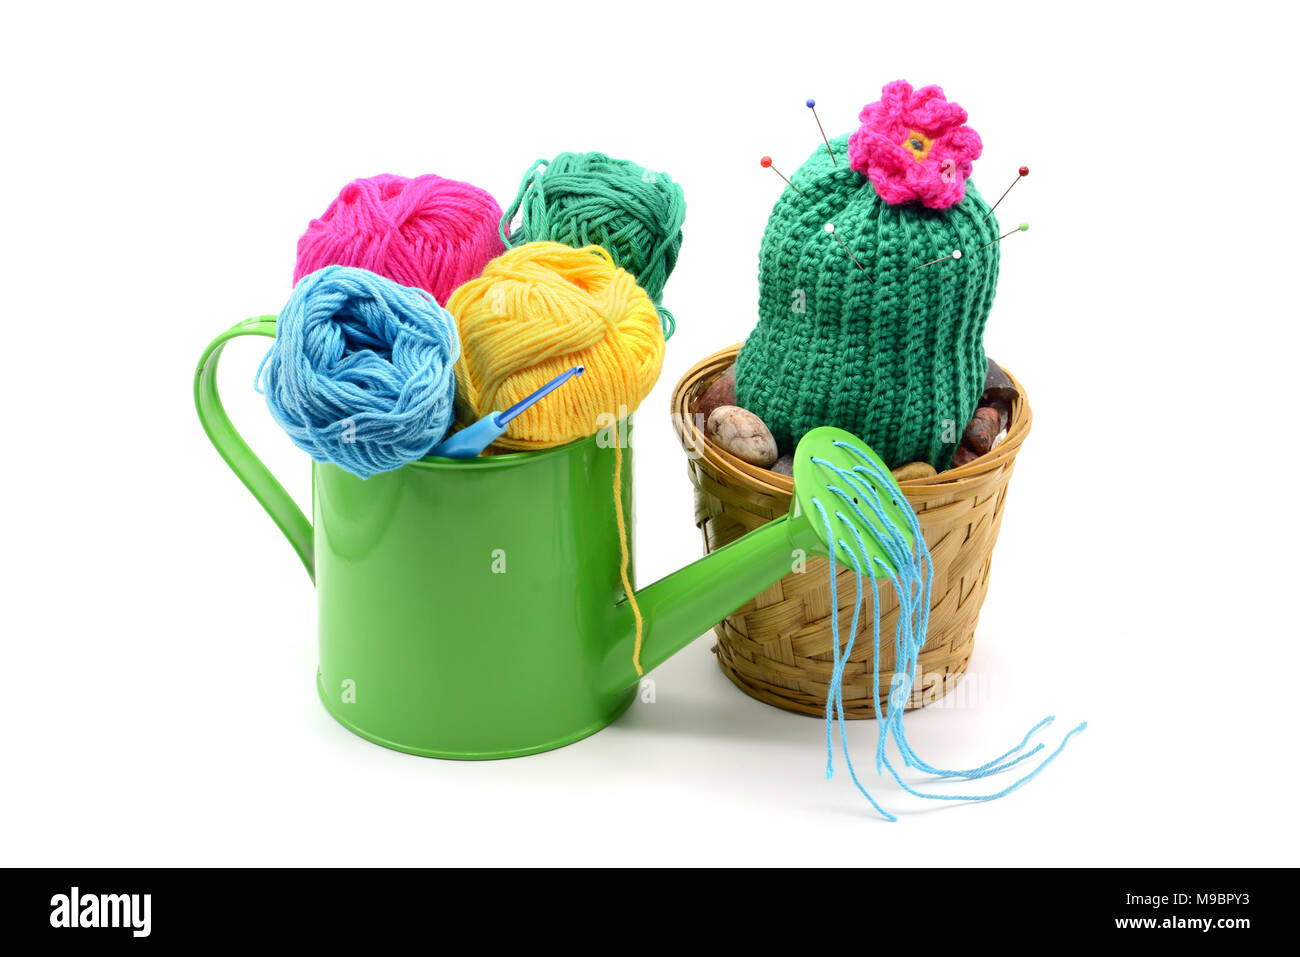 crochet cactus plant with flower head in flowerpot as pincushion. water can with wool balls in front. Stock Photo